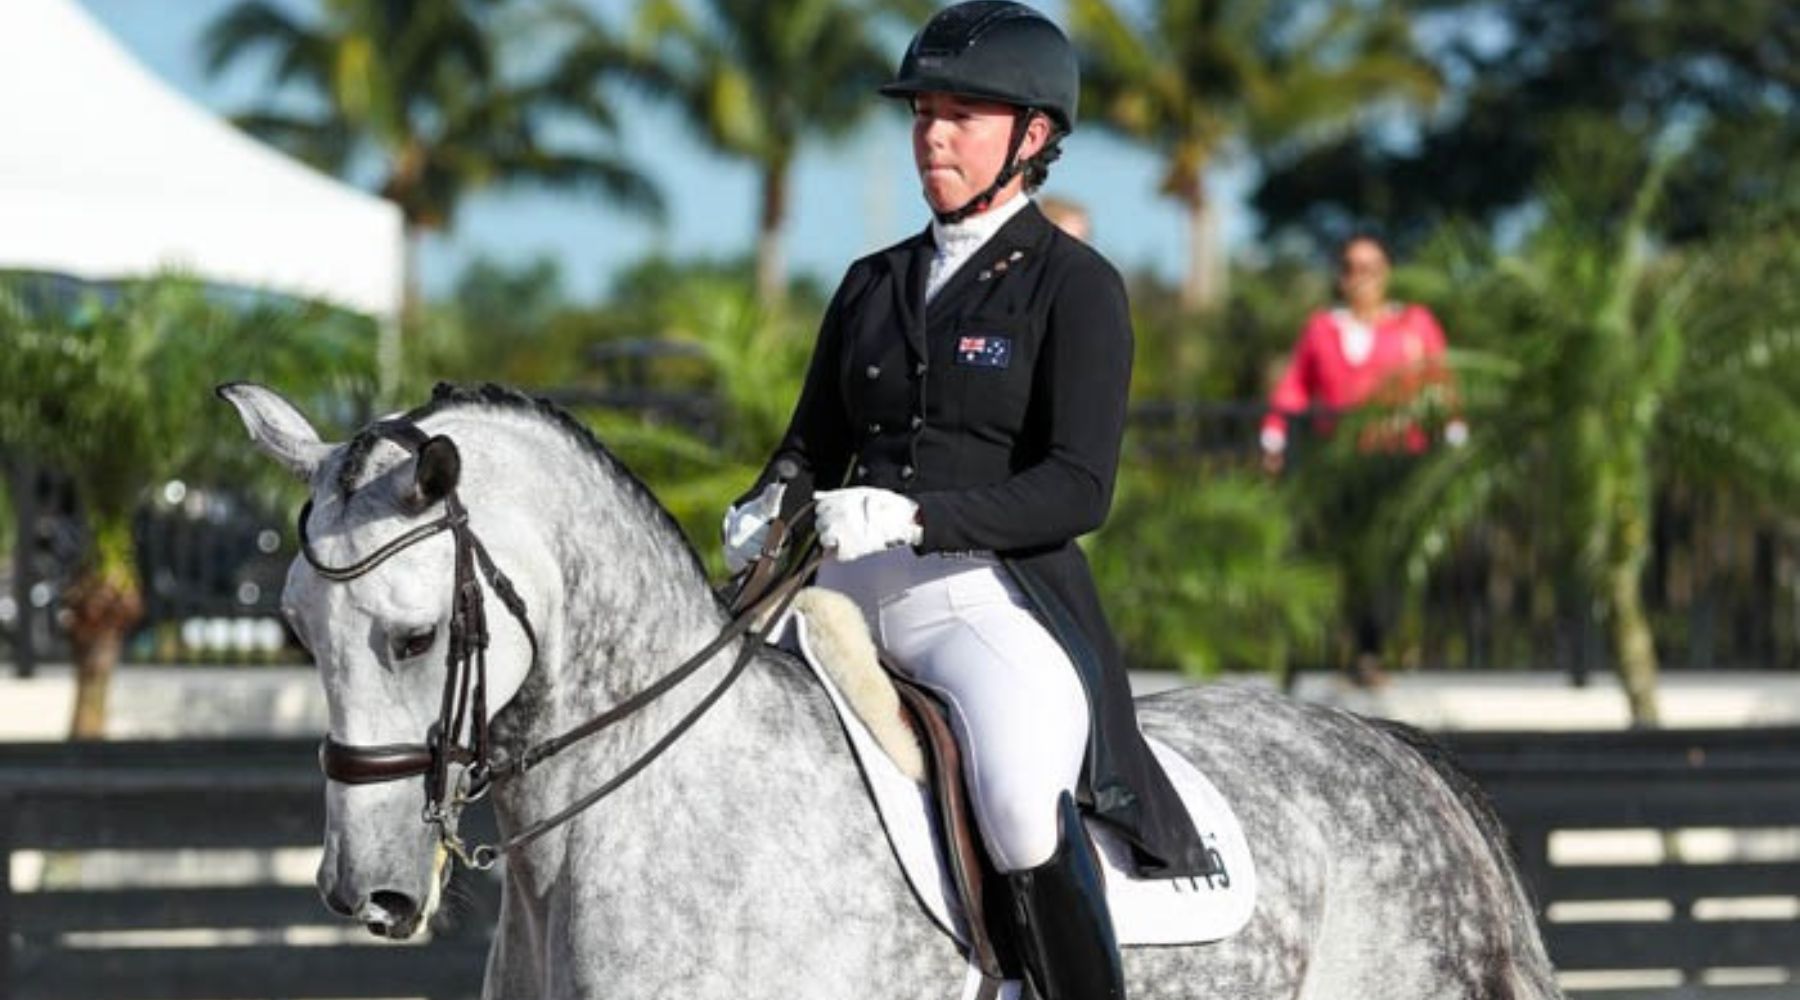 HOPE TAYLOR BEERLING – AUSTRALIAN INTERNATIONAL RIDER TAKING ON THE BEST IN THE USA